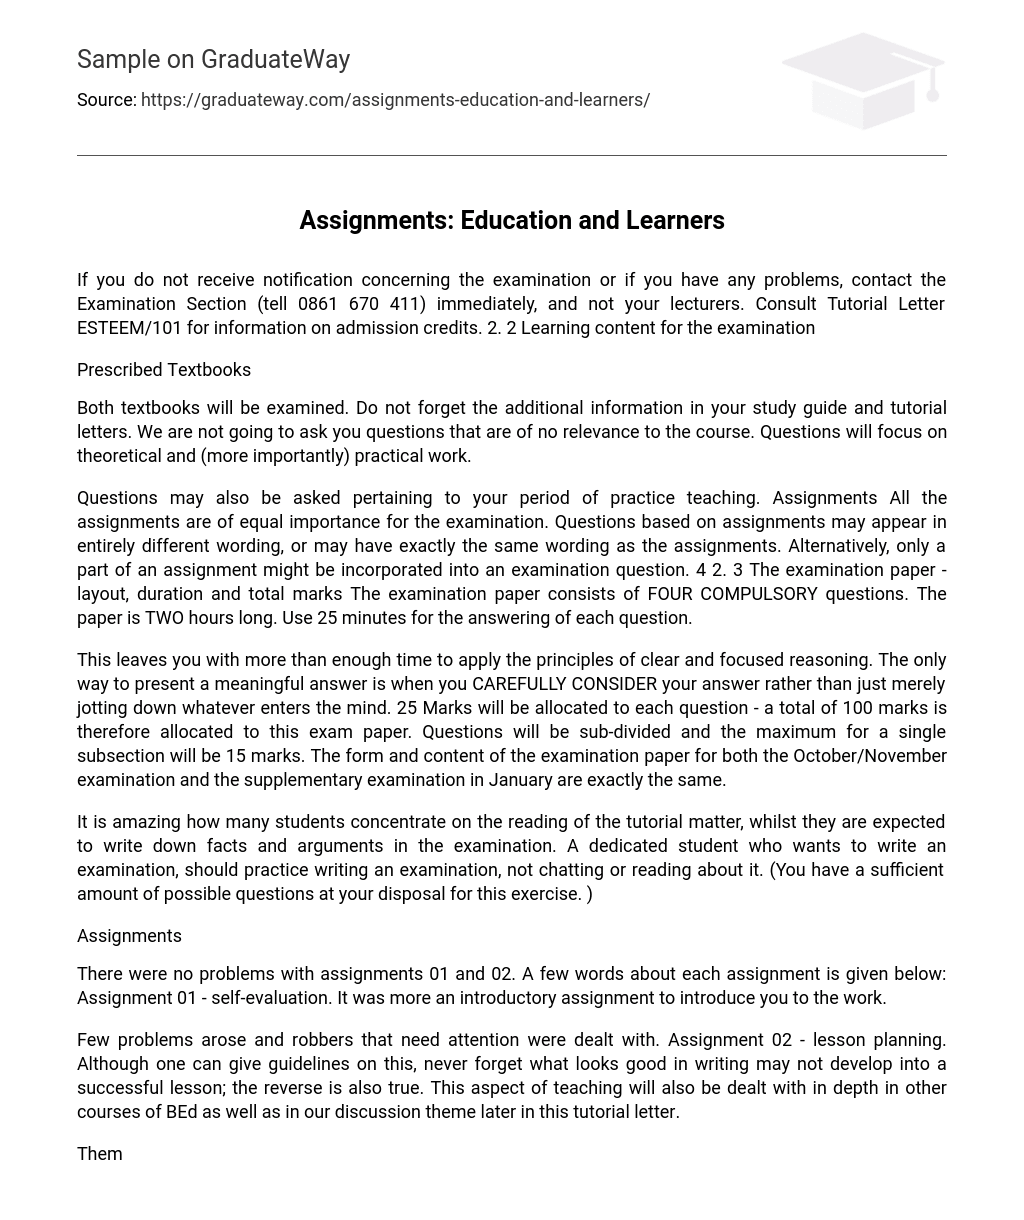 Assignments: Education and Learners